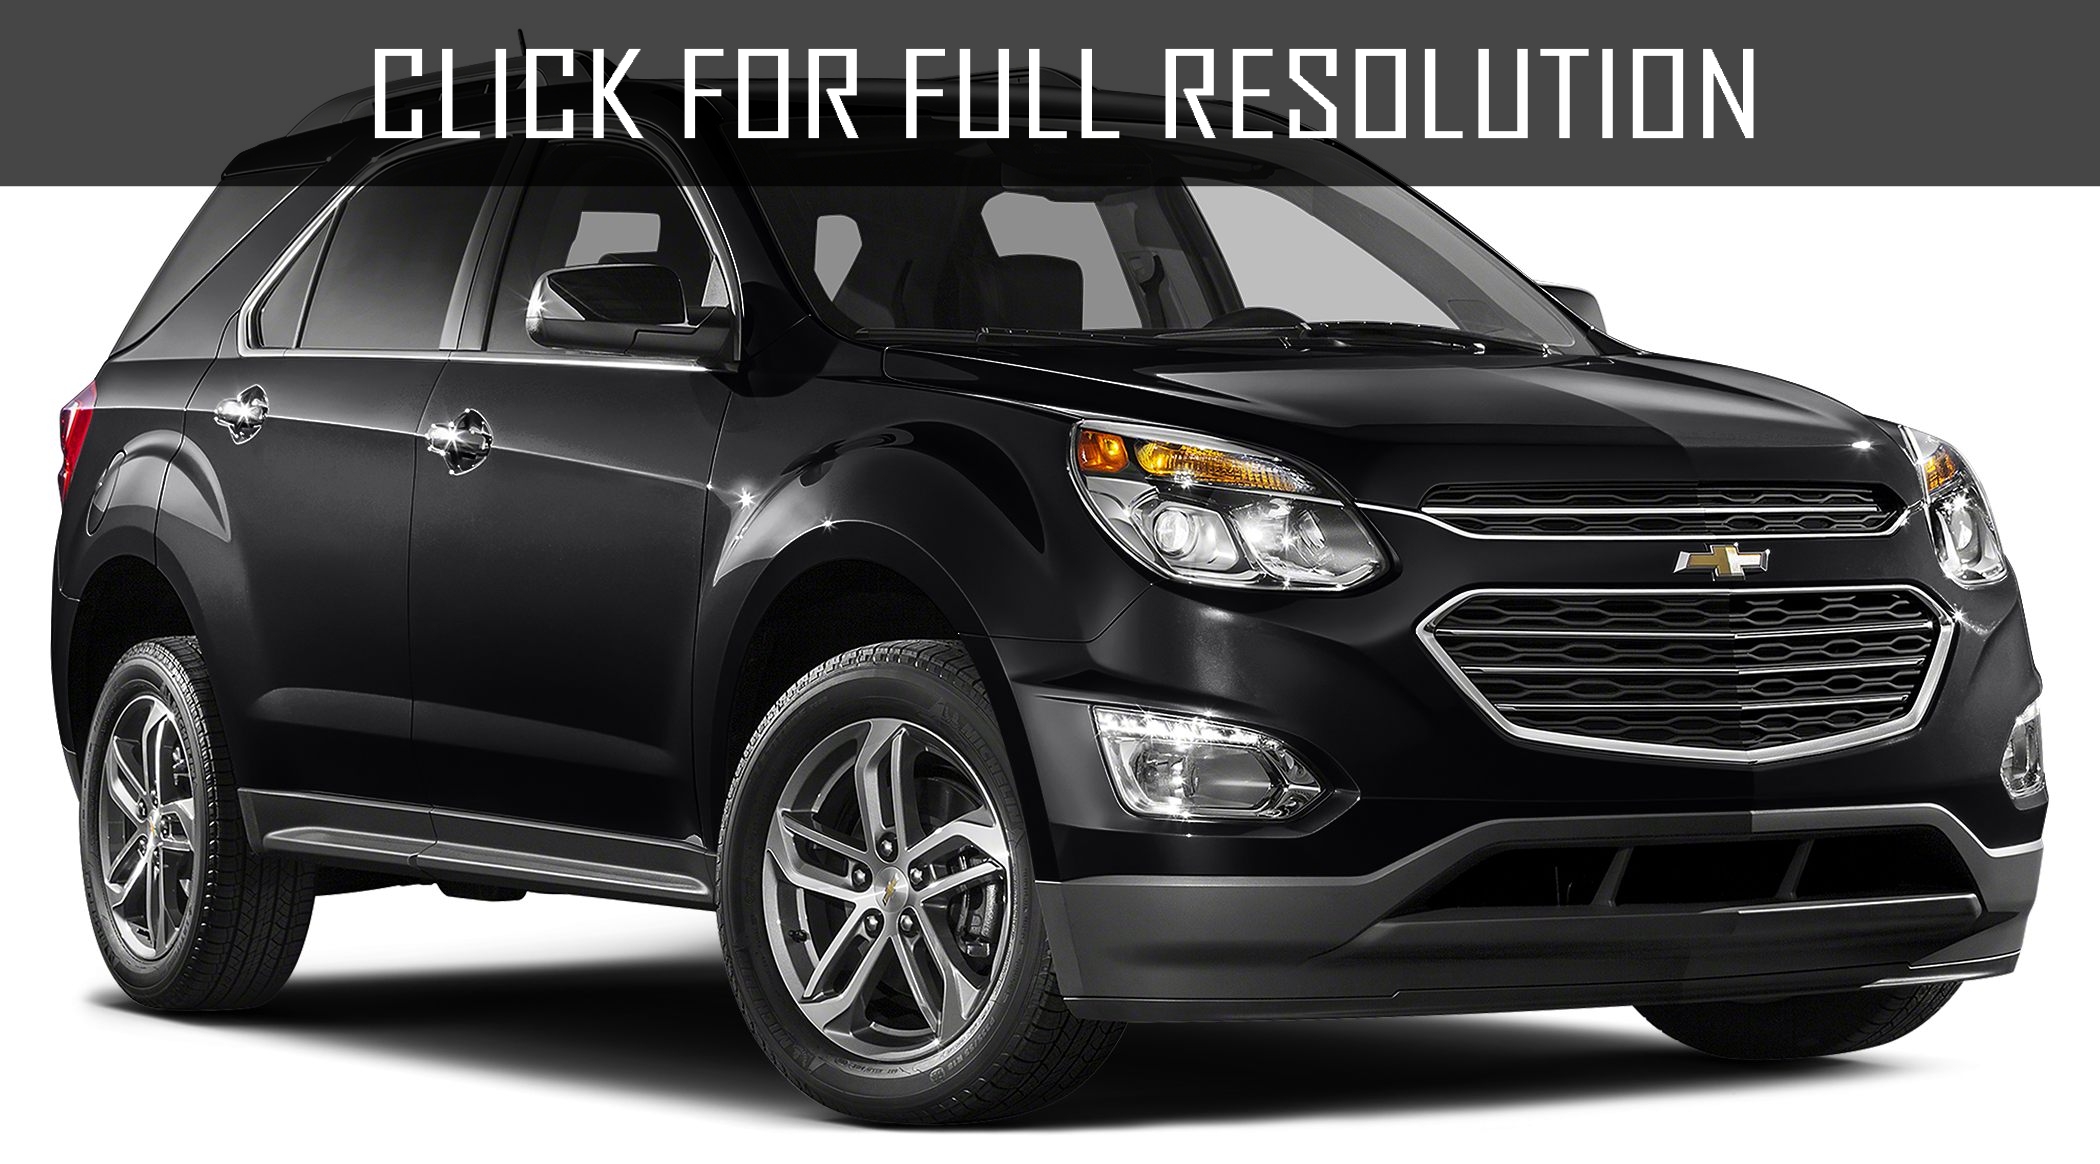 Chevrolet Equinox Black amazing photo gallery, some information and